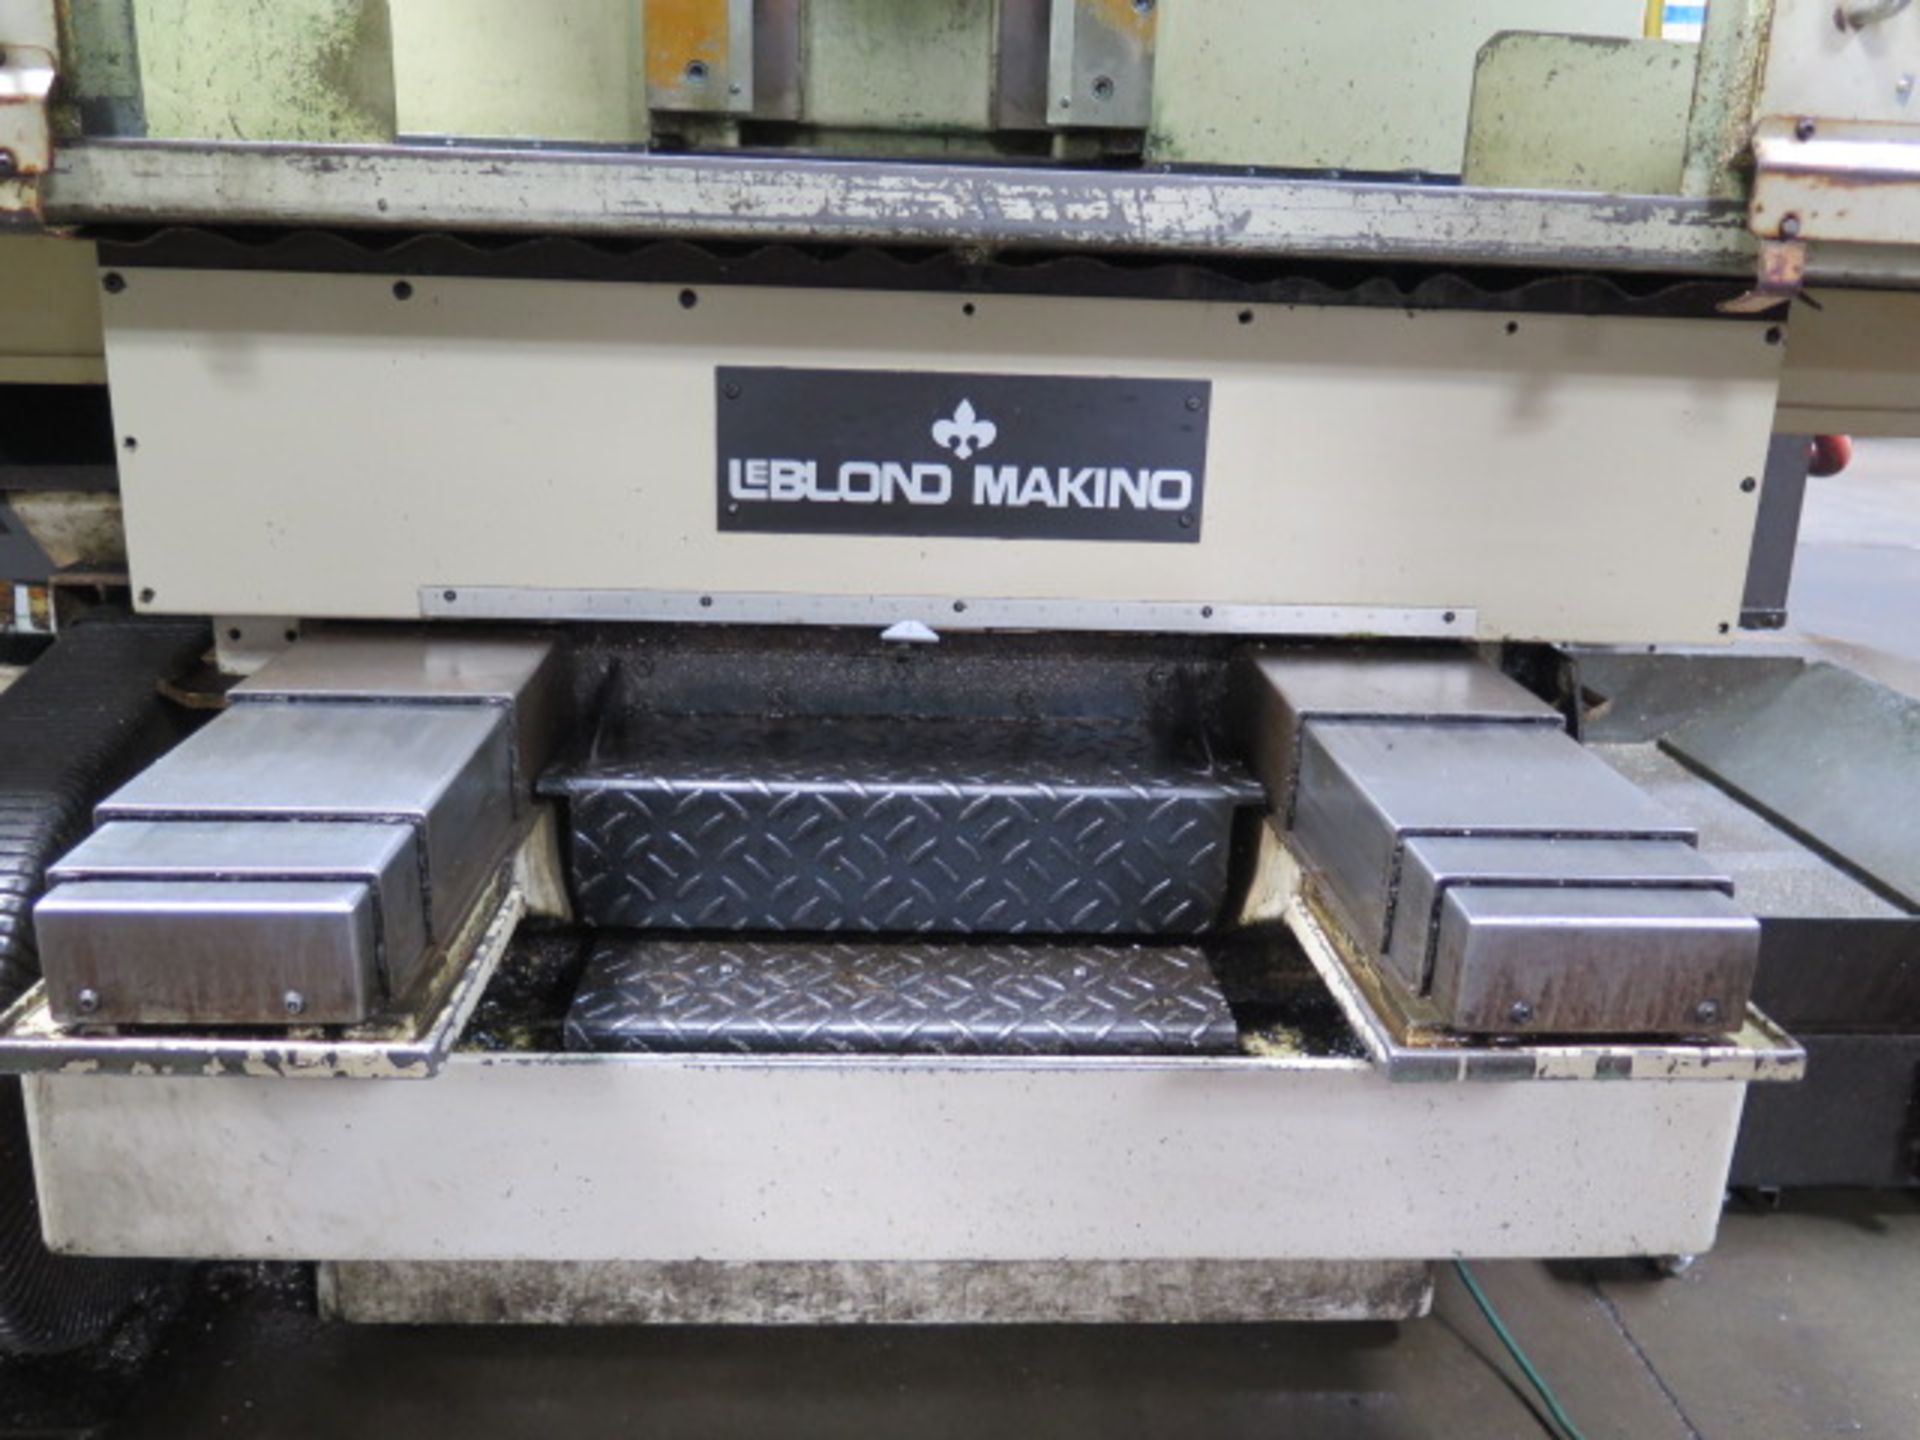 LeBlond Makino FNC-74/A30 CNC VMC s/n LM2-161 w/ GE Fanuc 0M Controls, SOLD AS IS - Image 10 of 13